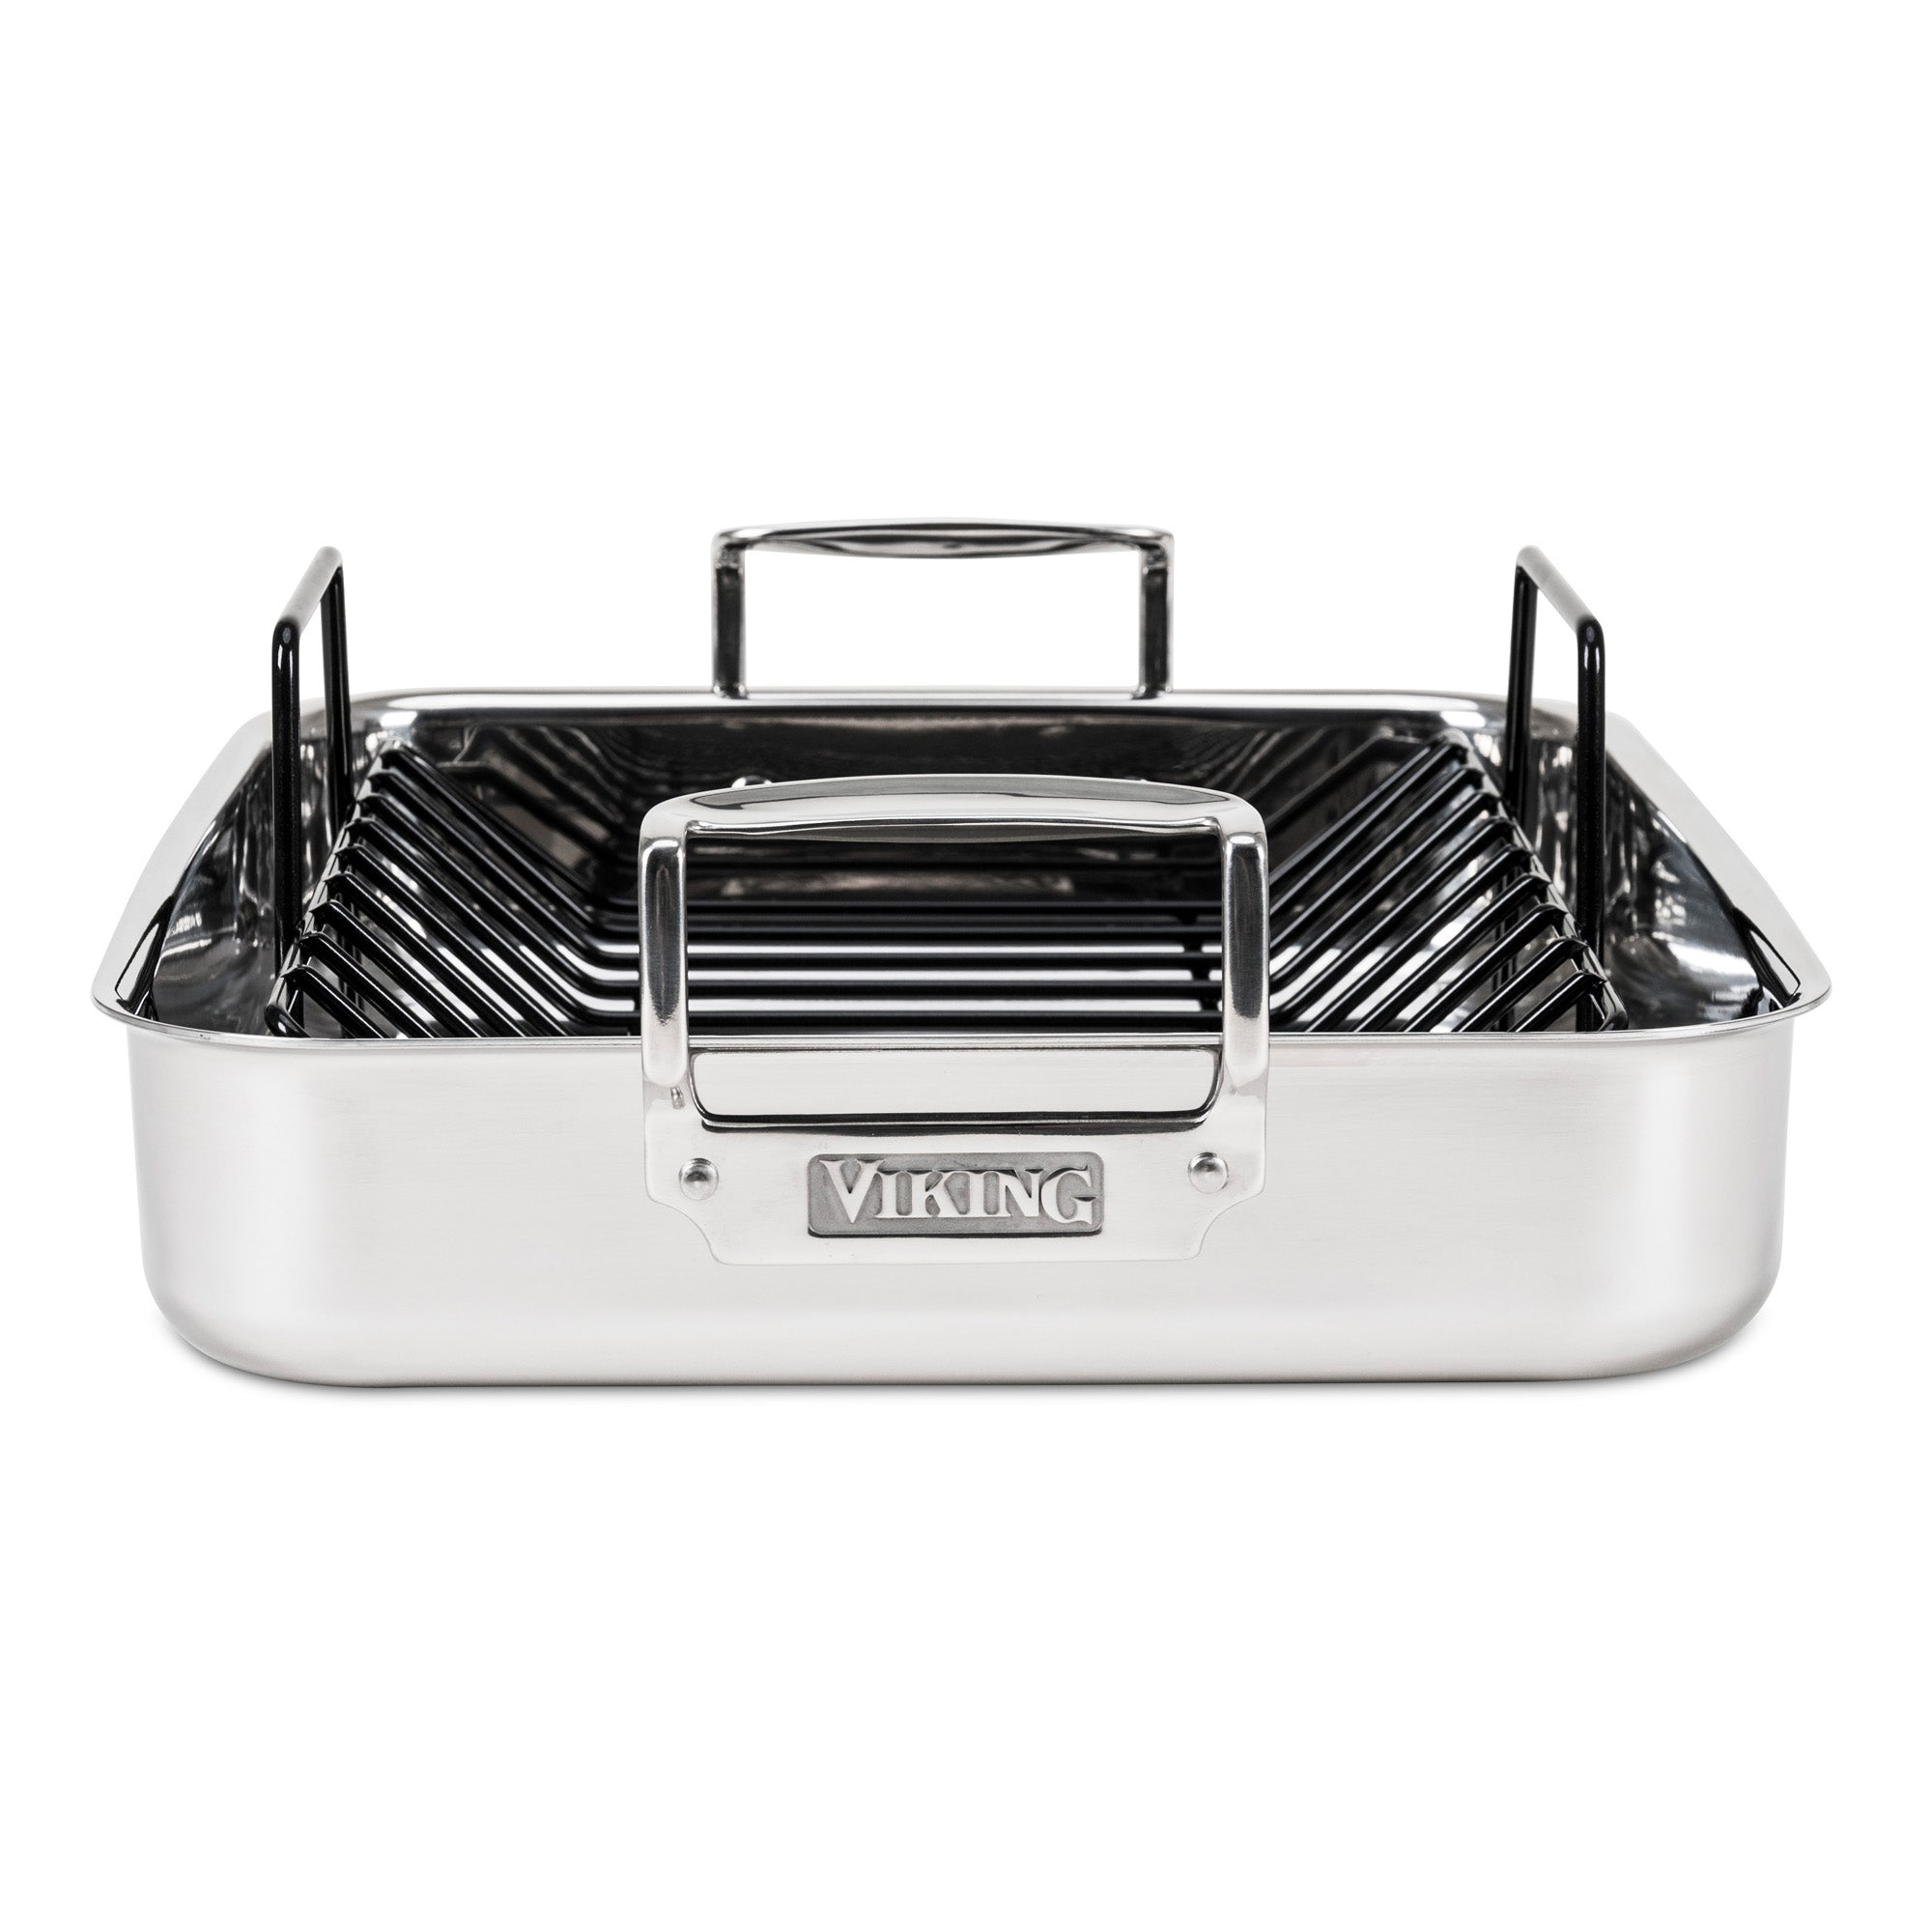 Viking Nonstick Roasting Rack for 13-inch x 16-inch Roasters